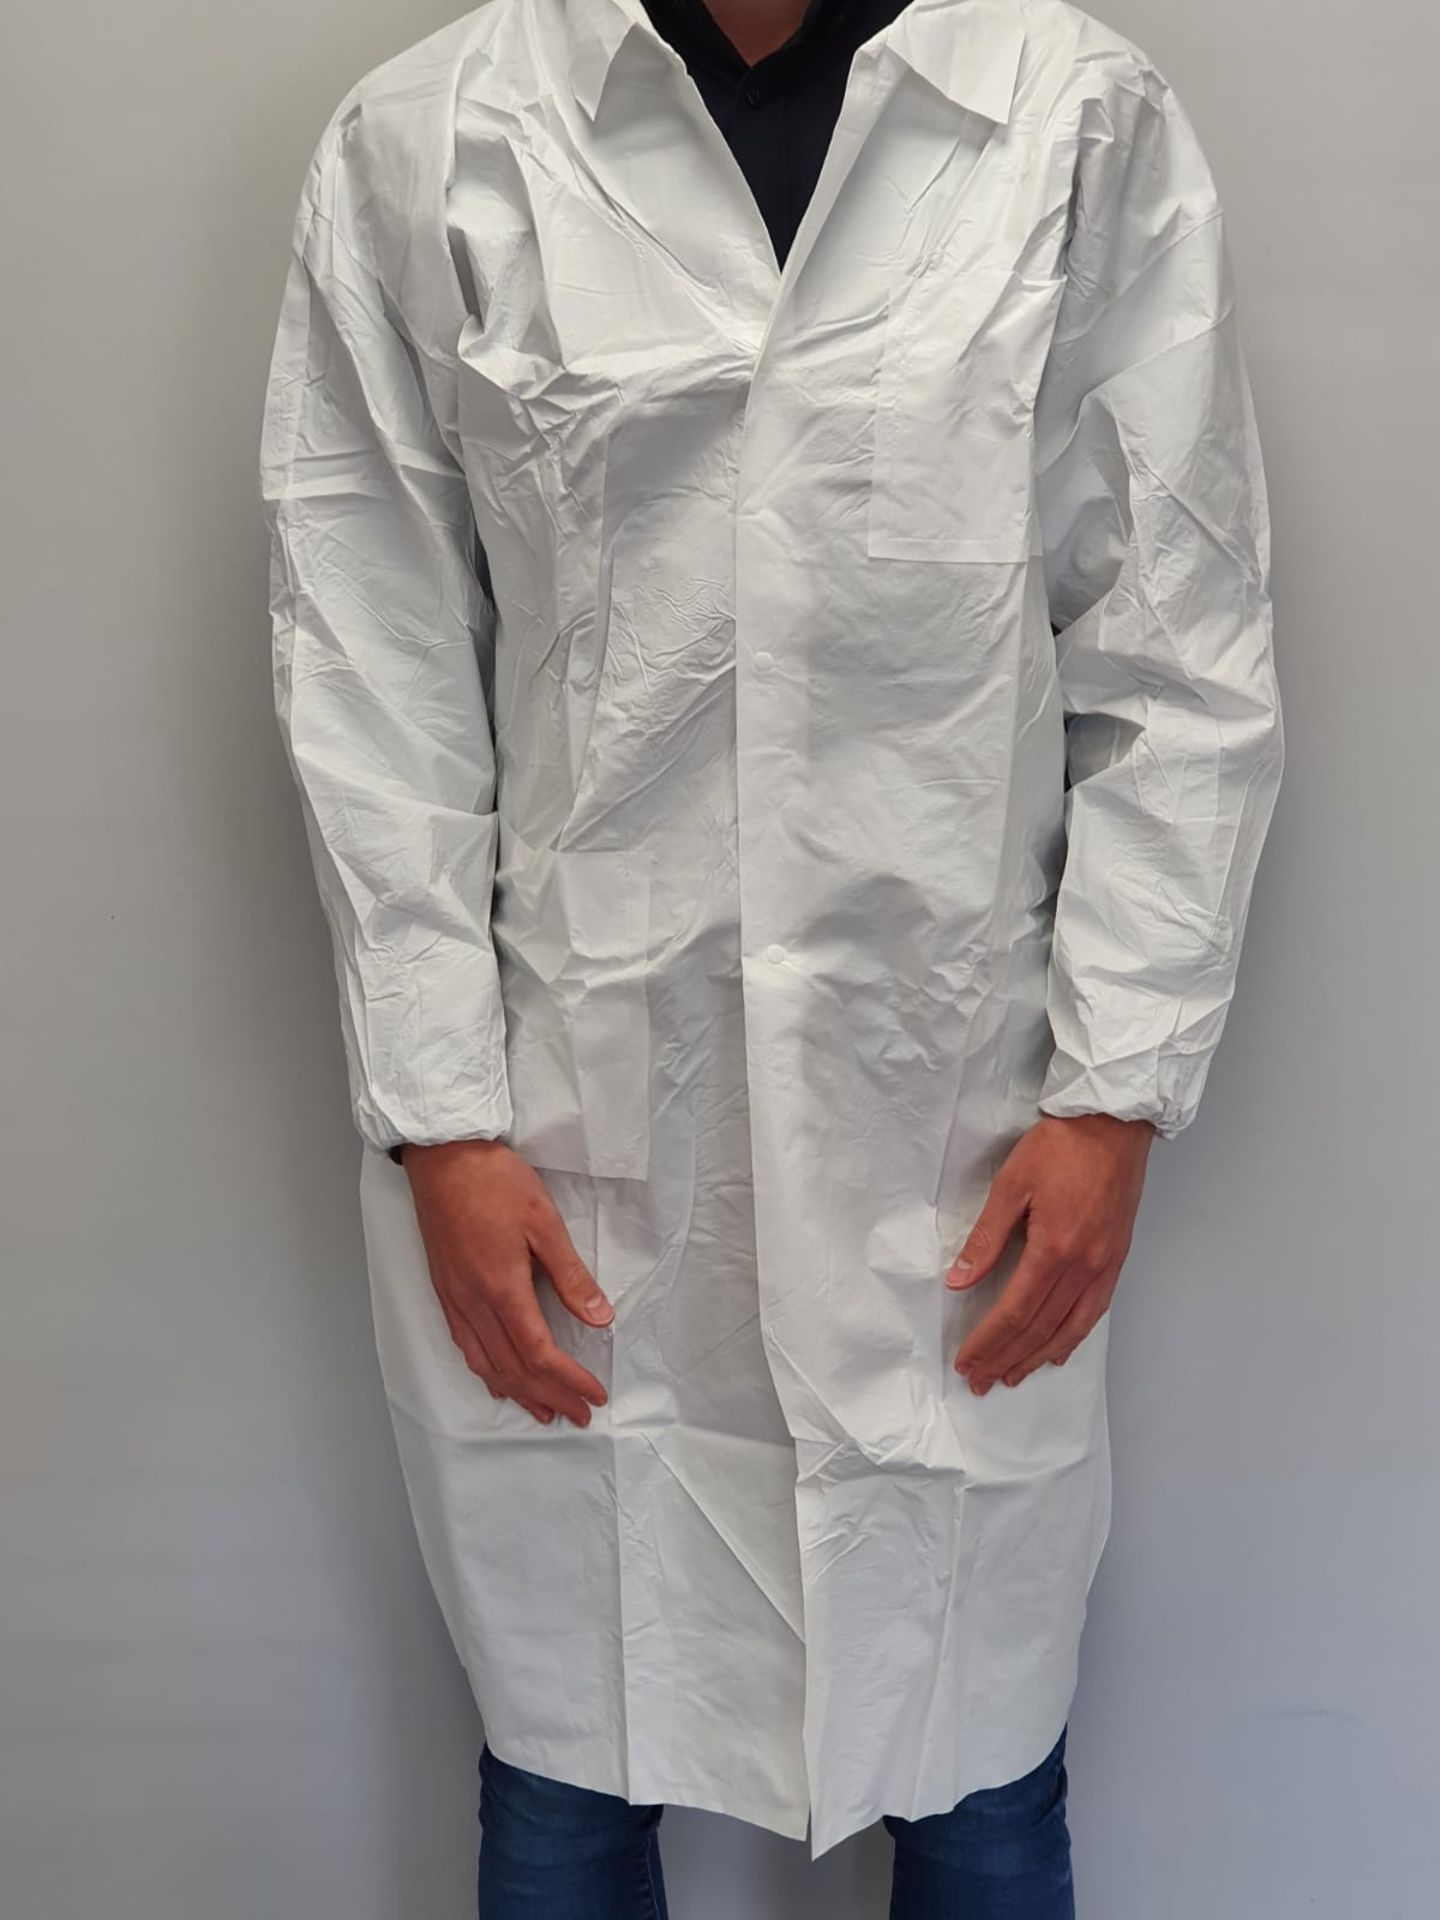 50 Disposable Lab Coats - Image 3 of 3